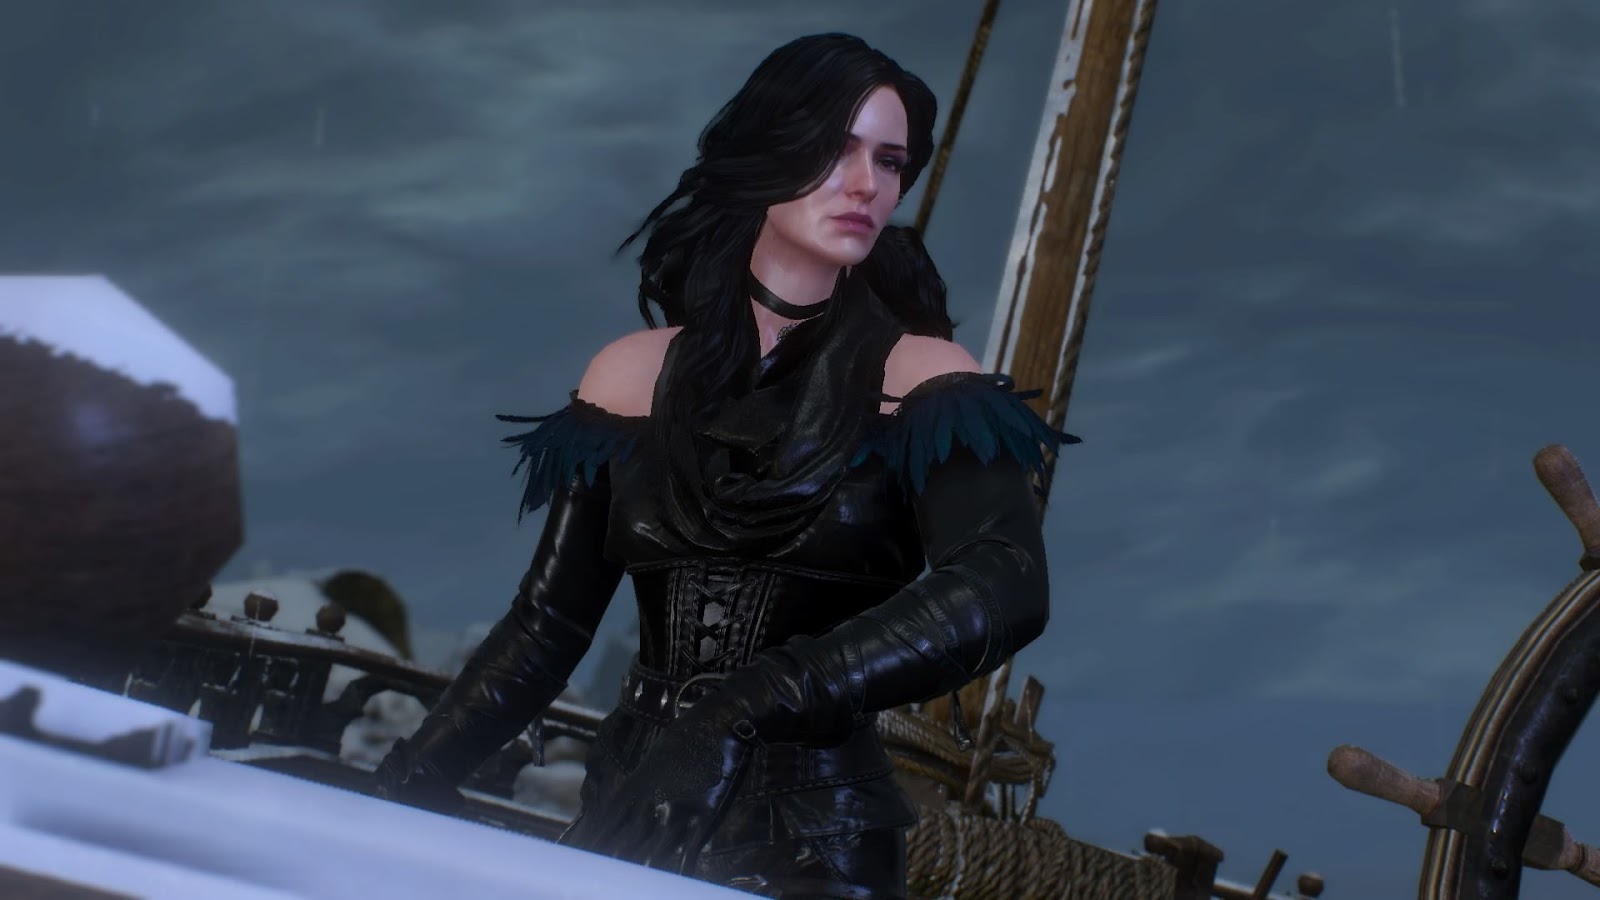 The witcher 3 alternative look for yennefer фото 16